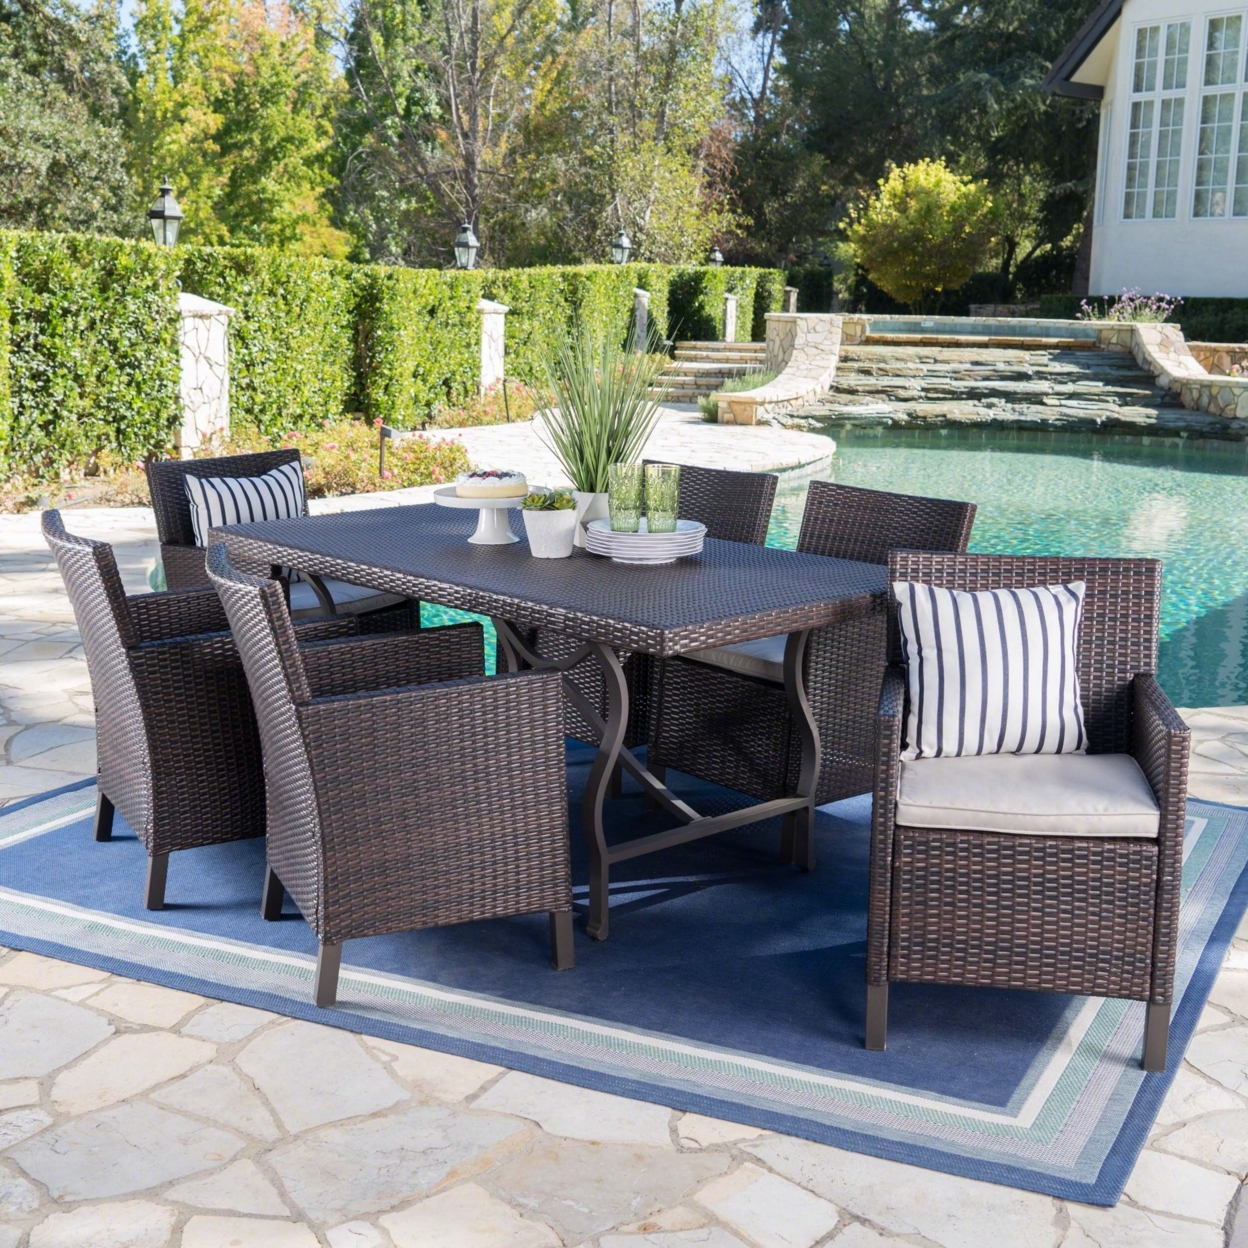 Arlone Outdoor 7 Piece Wicker Dining Set With Aluminum Framed Dining Table